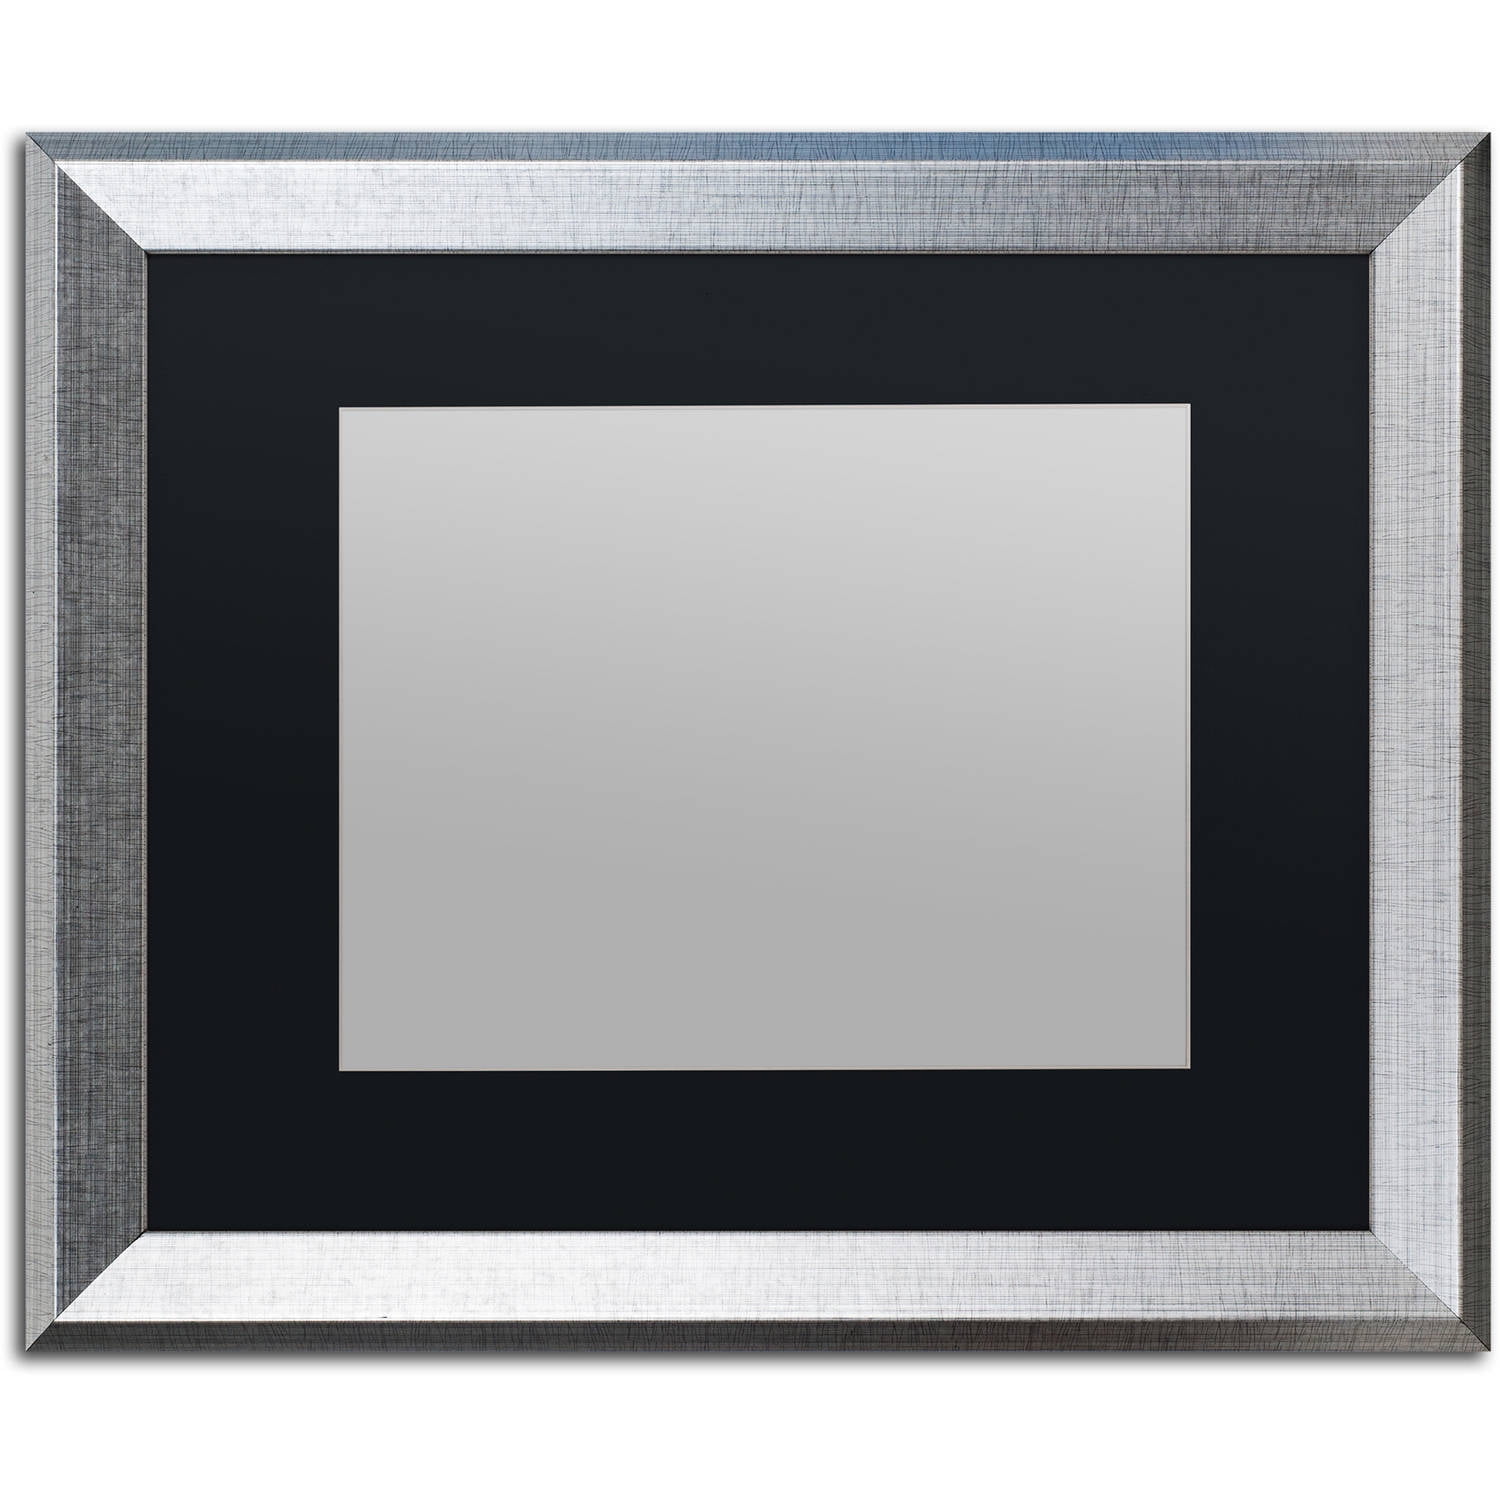  16x20 Silver Picture Frame, Frames for Canvas, Art